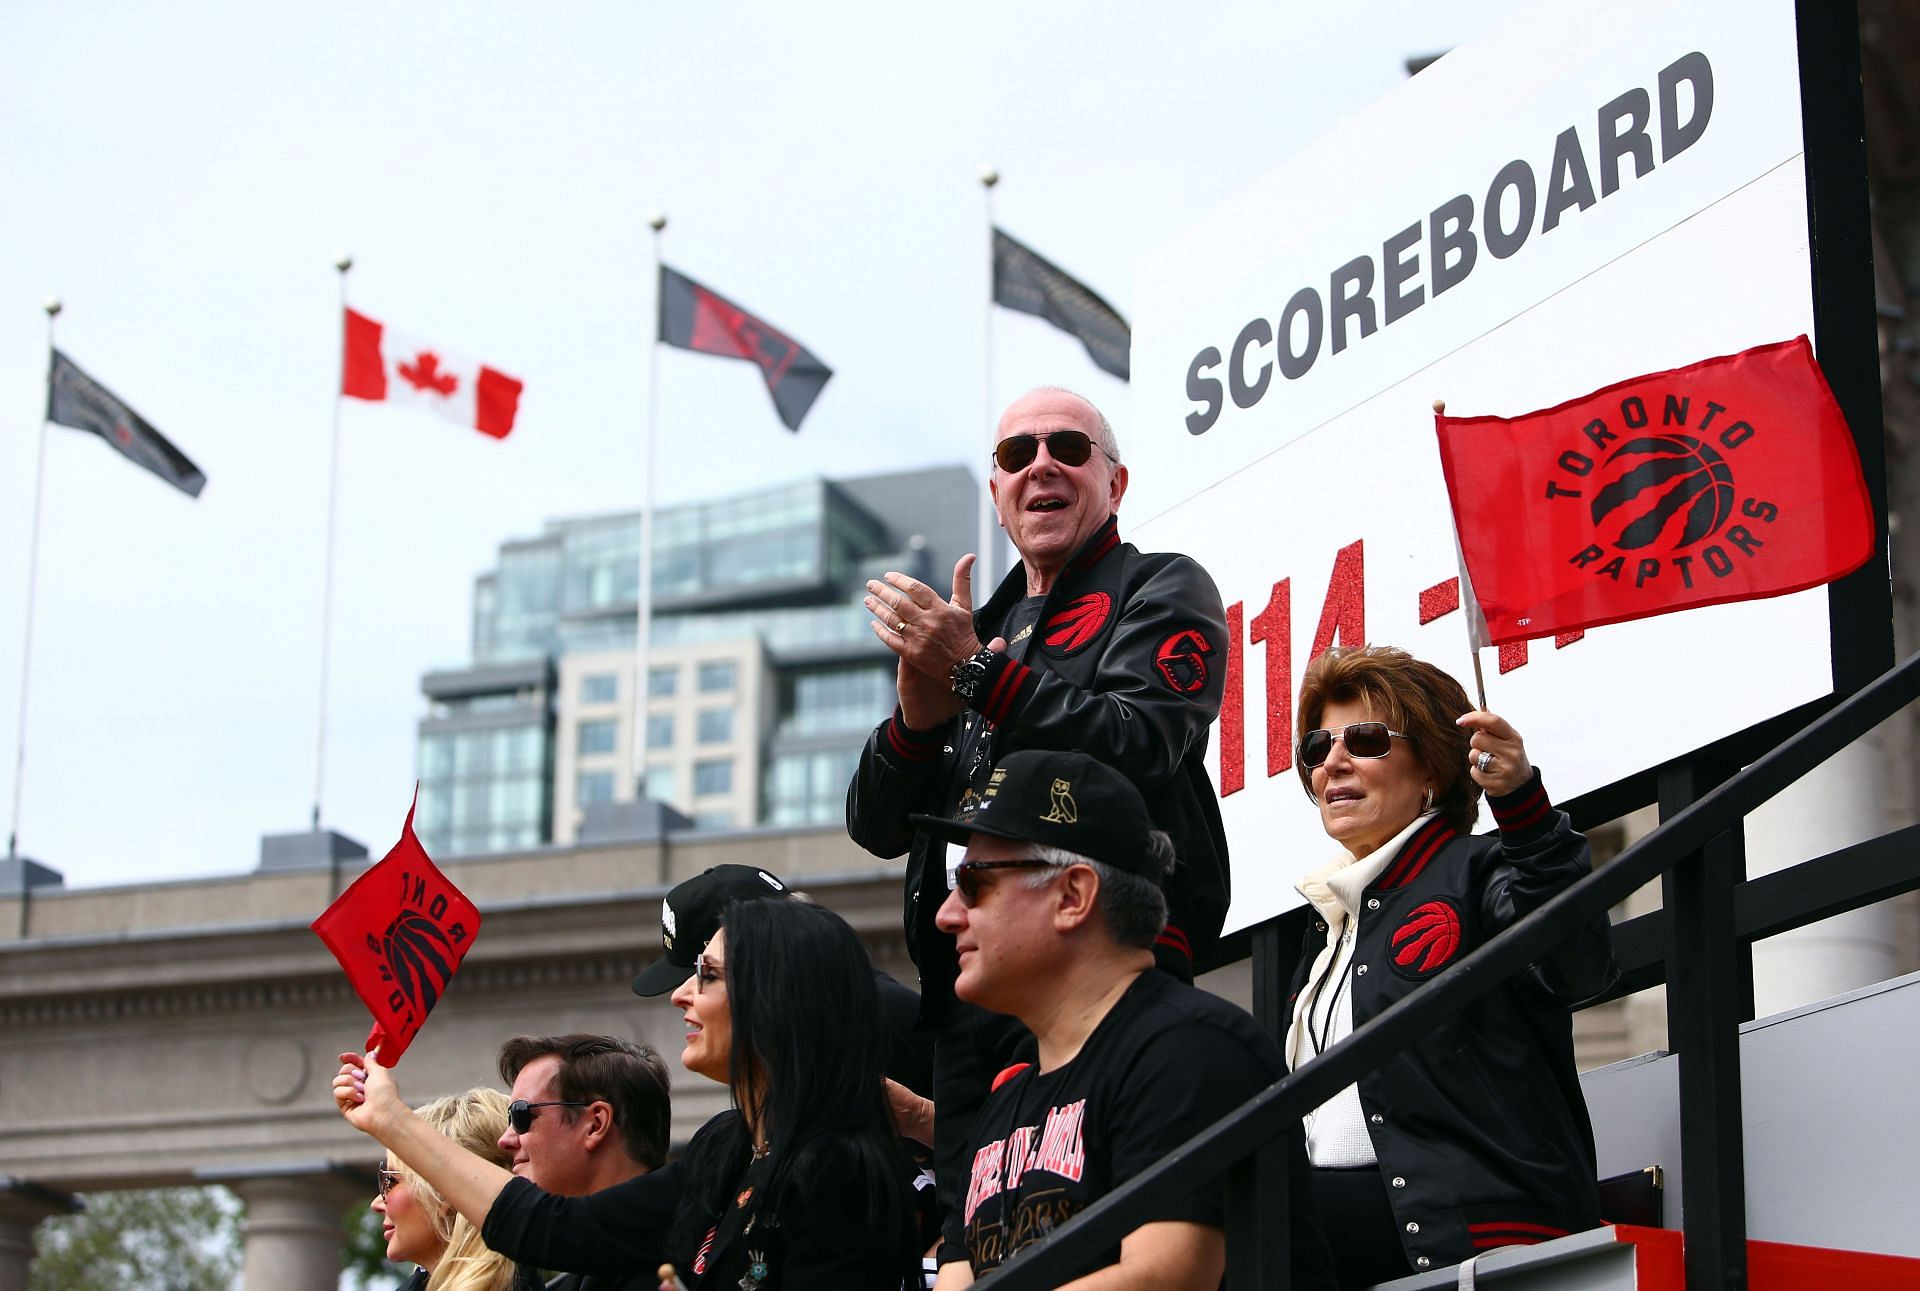 TORONTO, ON - JUNE 17: Larry Tanenbaum, Chairman of MLSE, owners of the Toronto Raptors waves to the crowd during the Toronto Raptors Victory Parade on June 17, 2019 in Toronto, Canada. The Toronto Raptors beat the Golden State Warriors 4-2 to win the 2019 Finals.